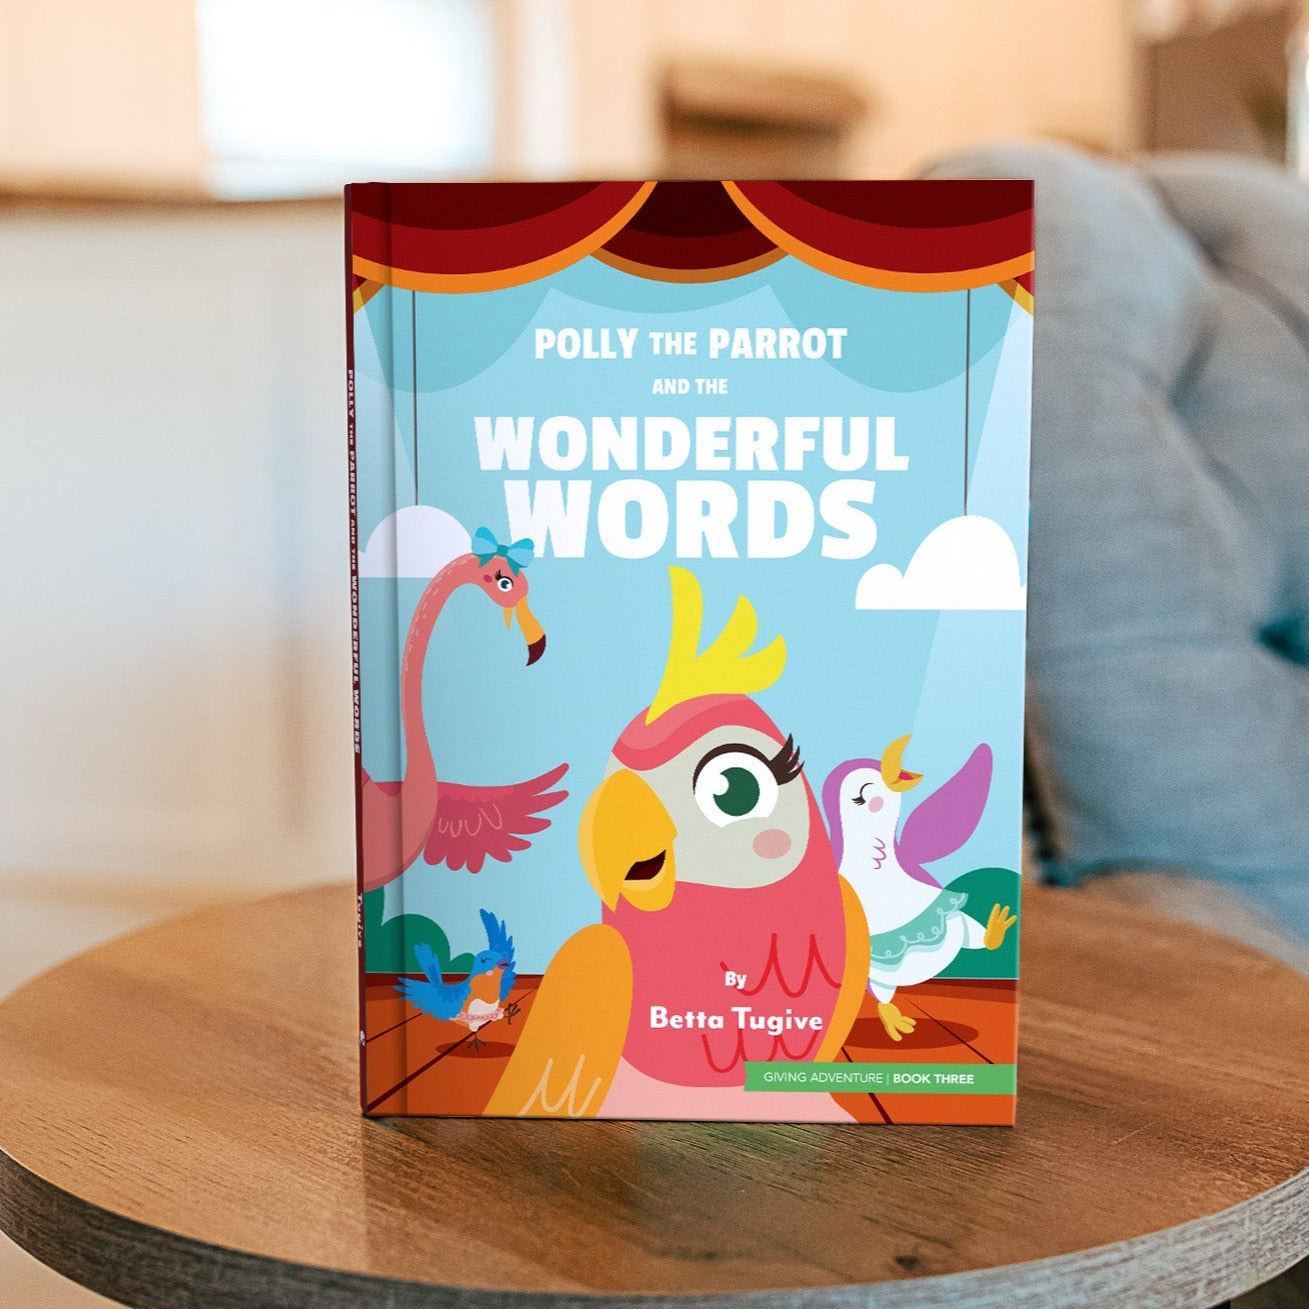 Polly the Parrot and the Wonderful Words